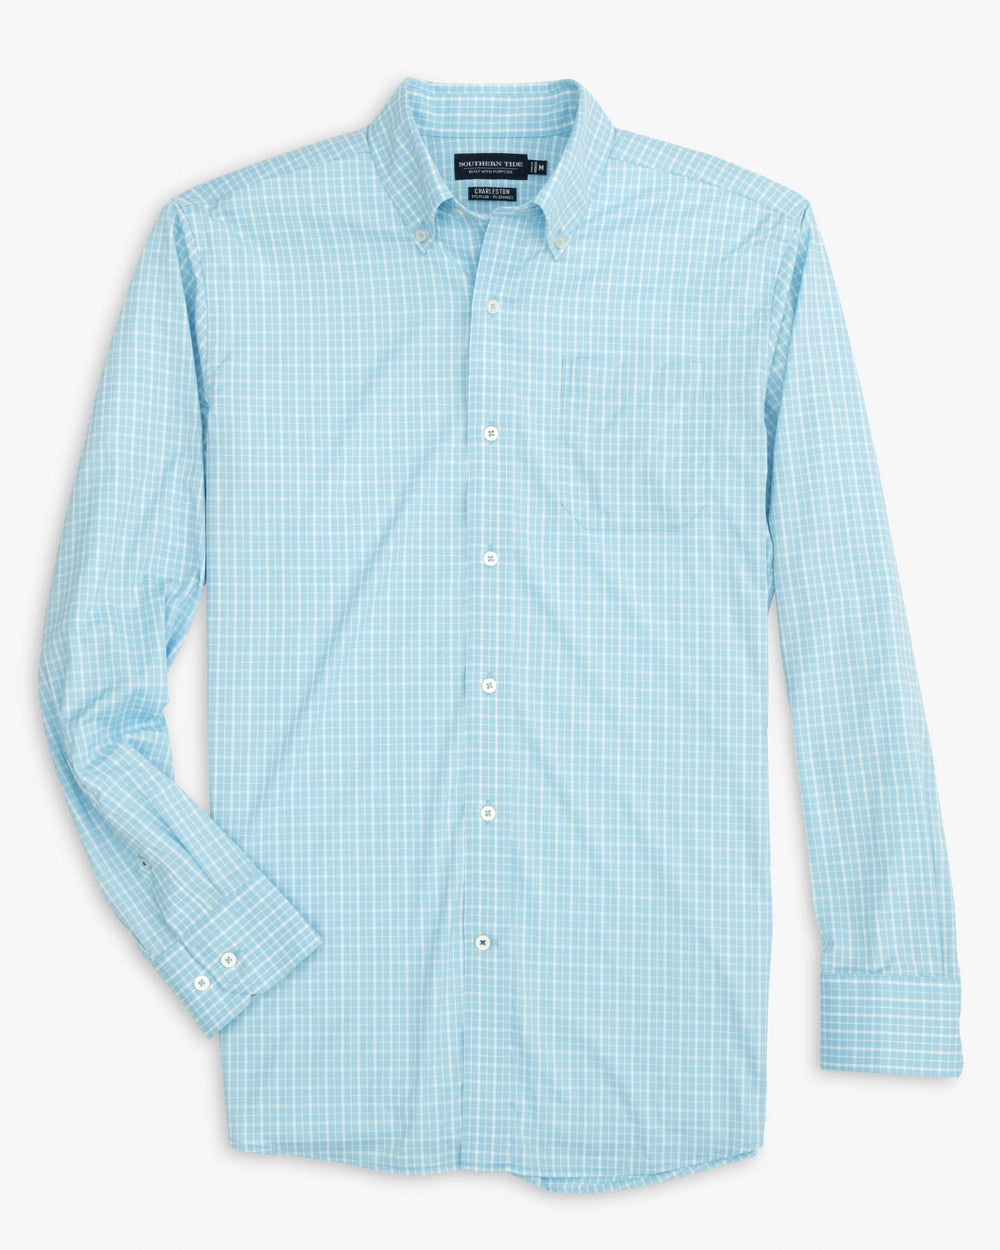 The front view of the Southern Tide brrr Charleston Beaumont Plaid Intercoastal Sport Shirt by Southern Tide - Rain Water